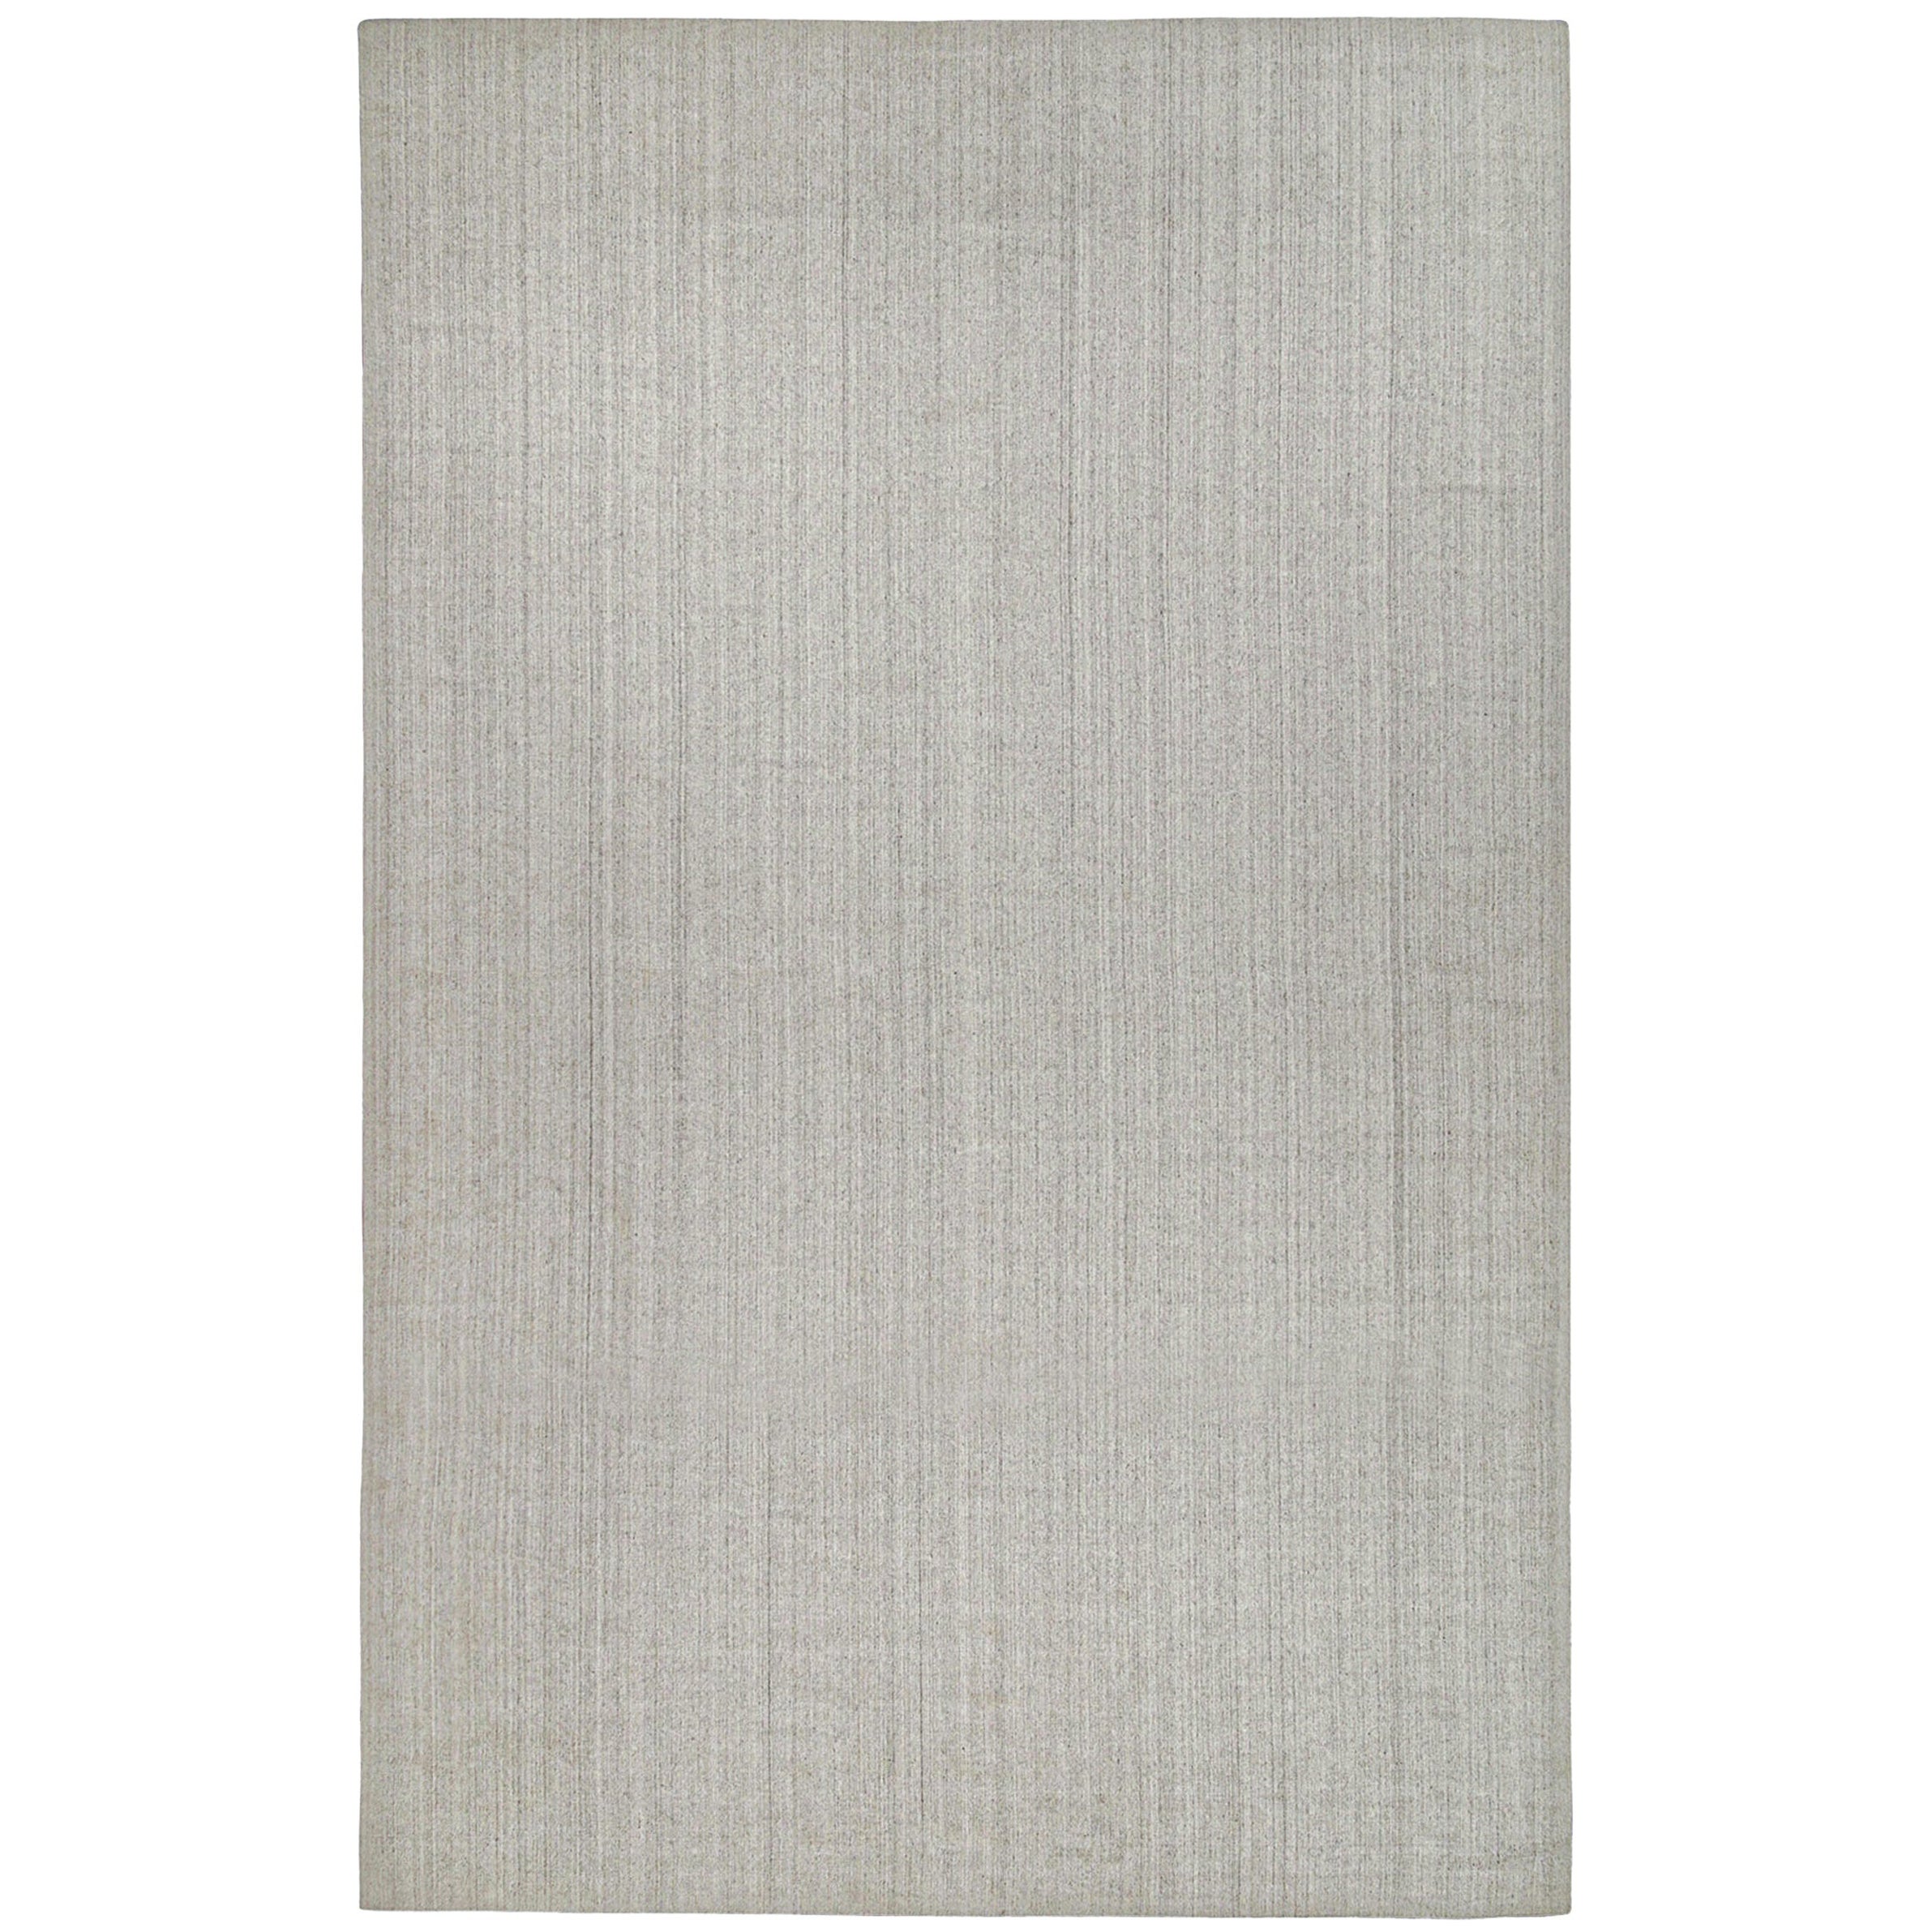 Rug & Kilim’s Modern Rug in Solid Gray and Off-White Striae For Sale